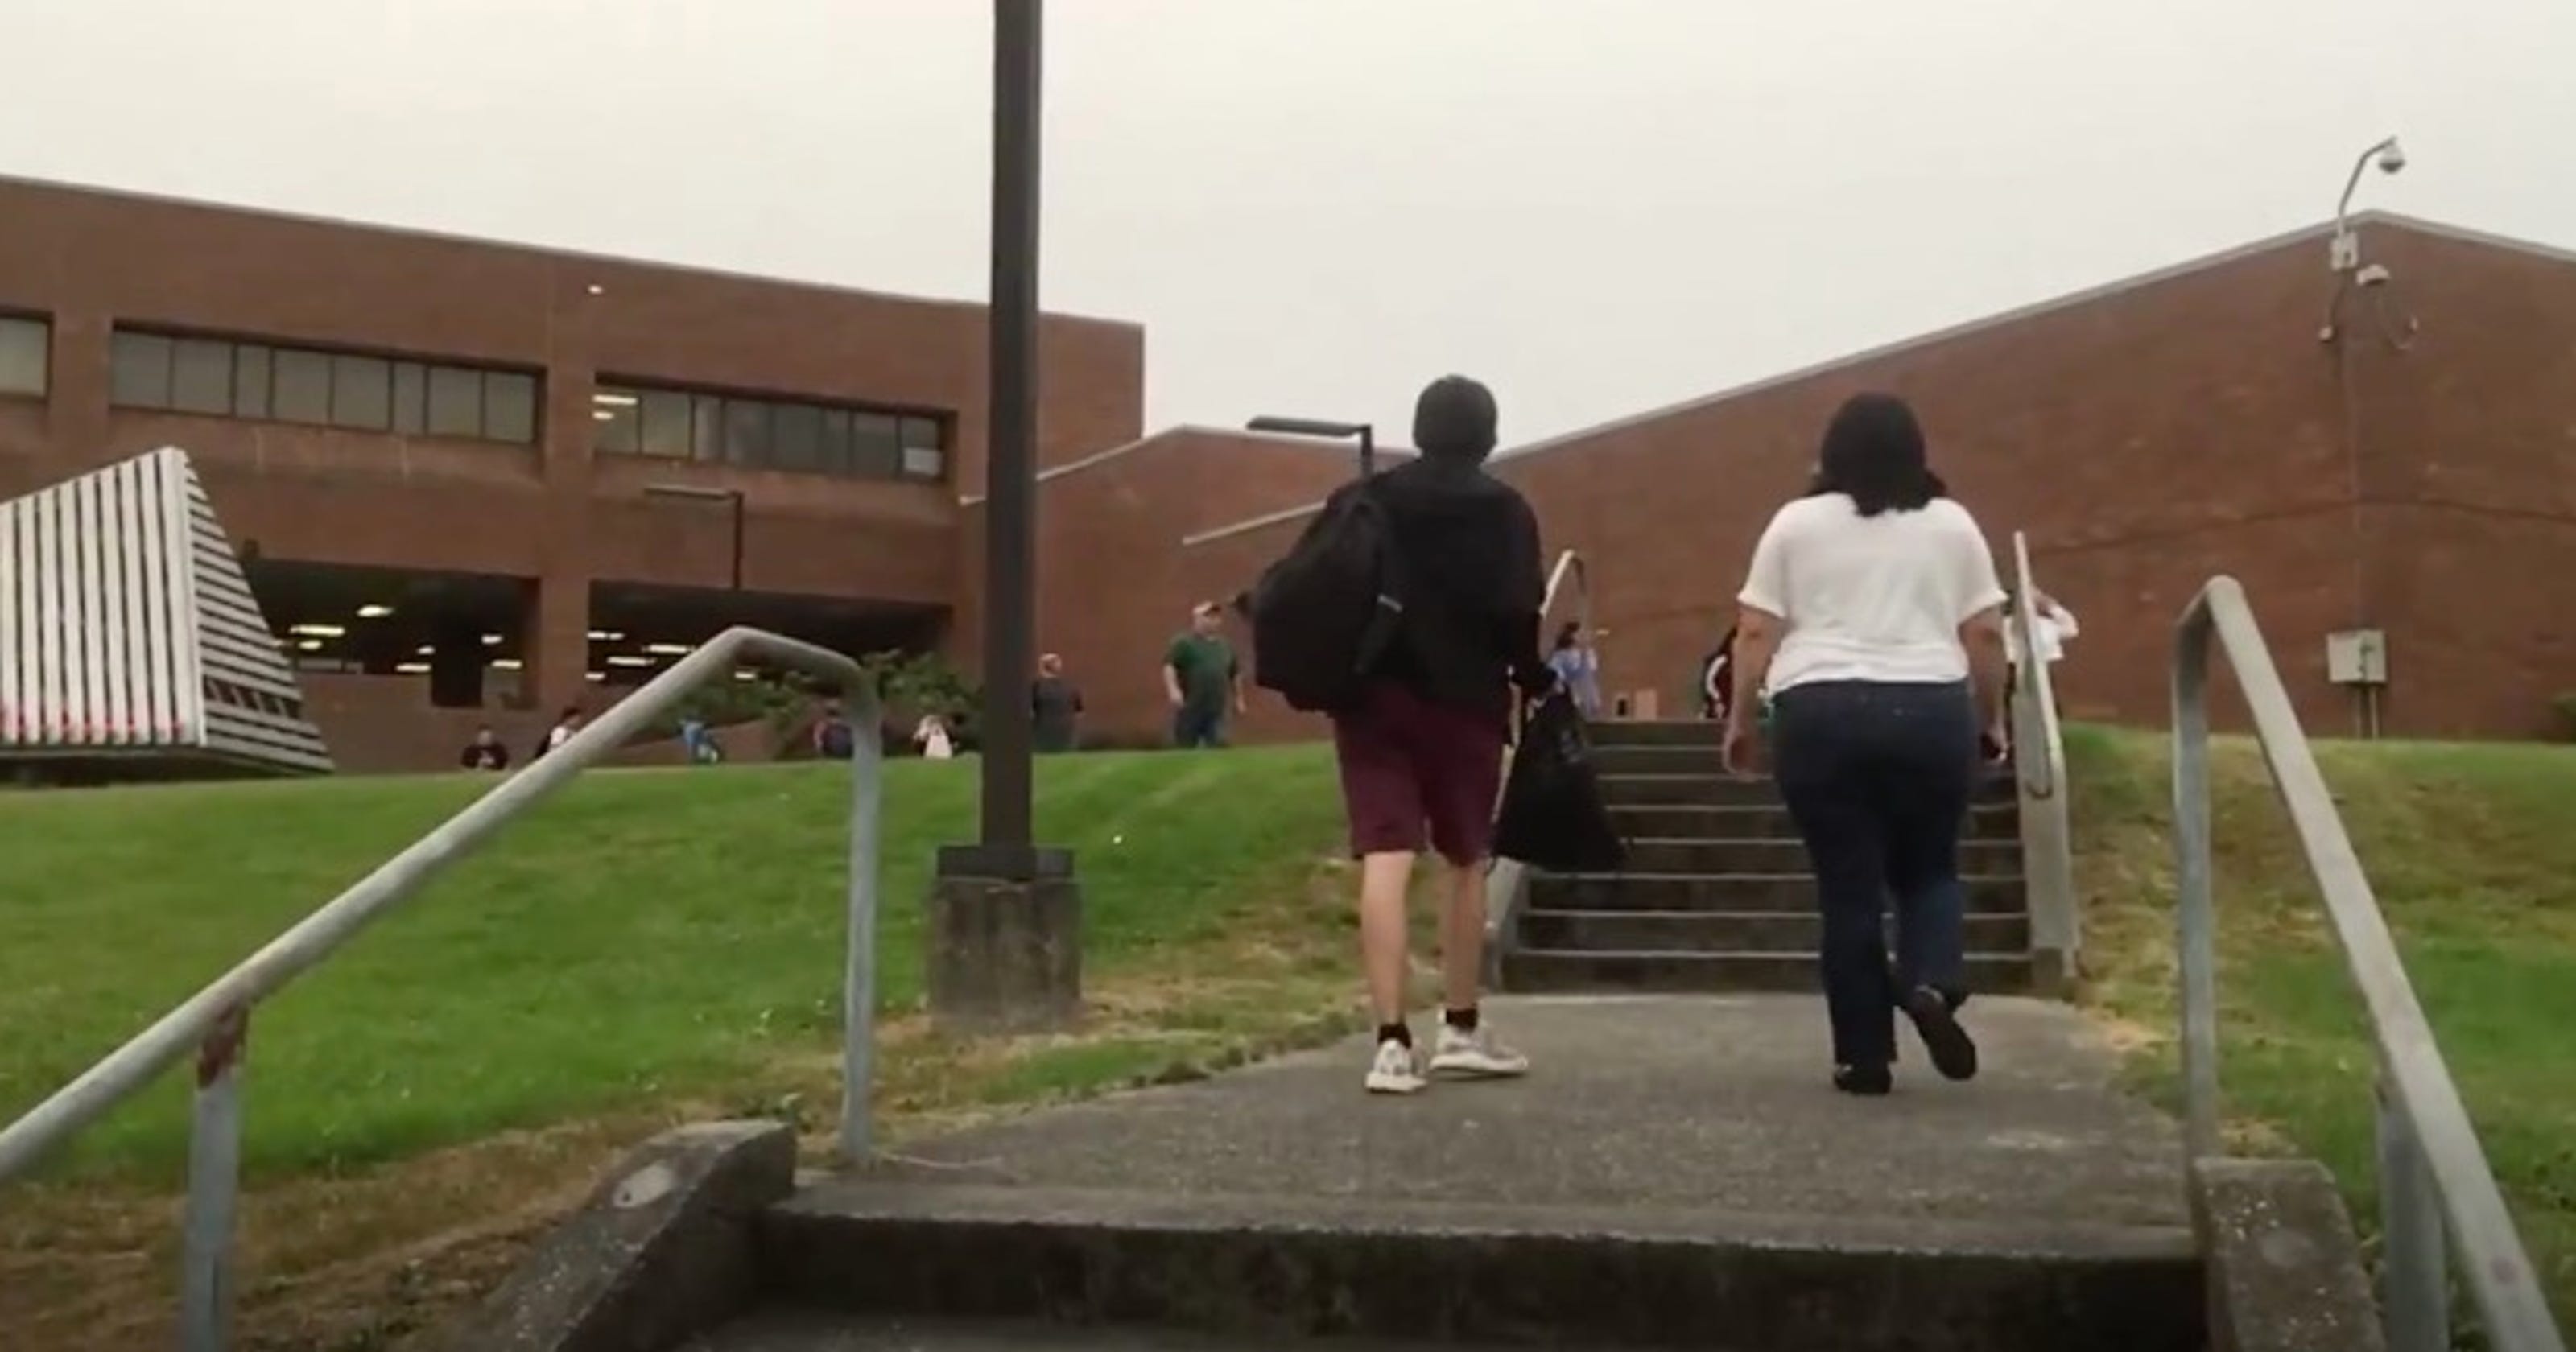 Classes resume Tuesday after bomb threat at South Kitsap High School